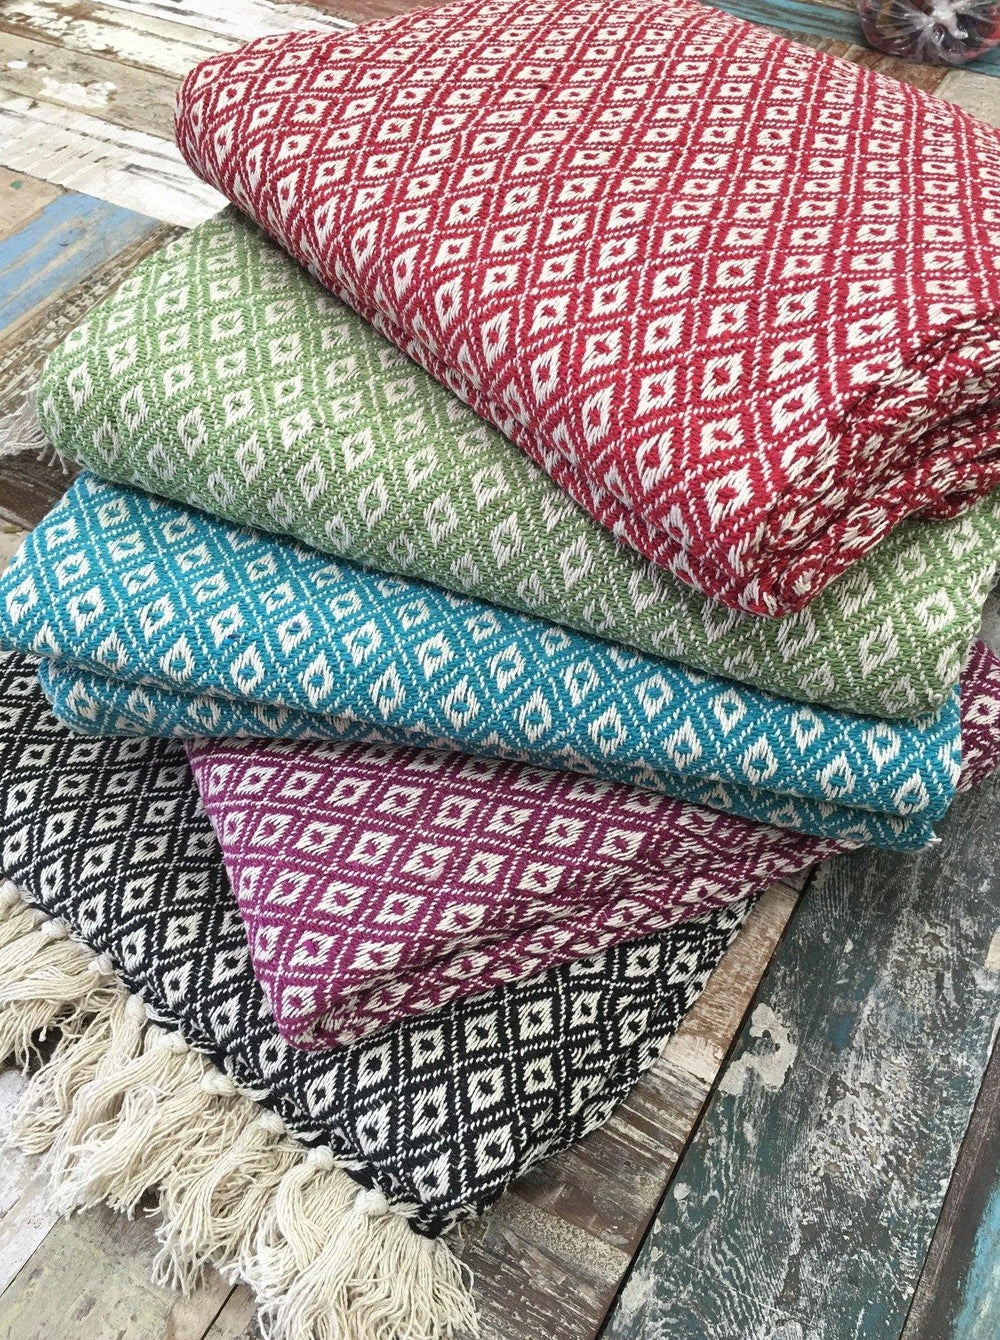 Small Cotton Throw in Diamond Geometric Weave - Second Nature Online